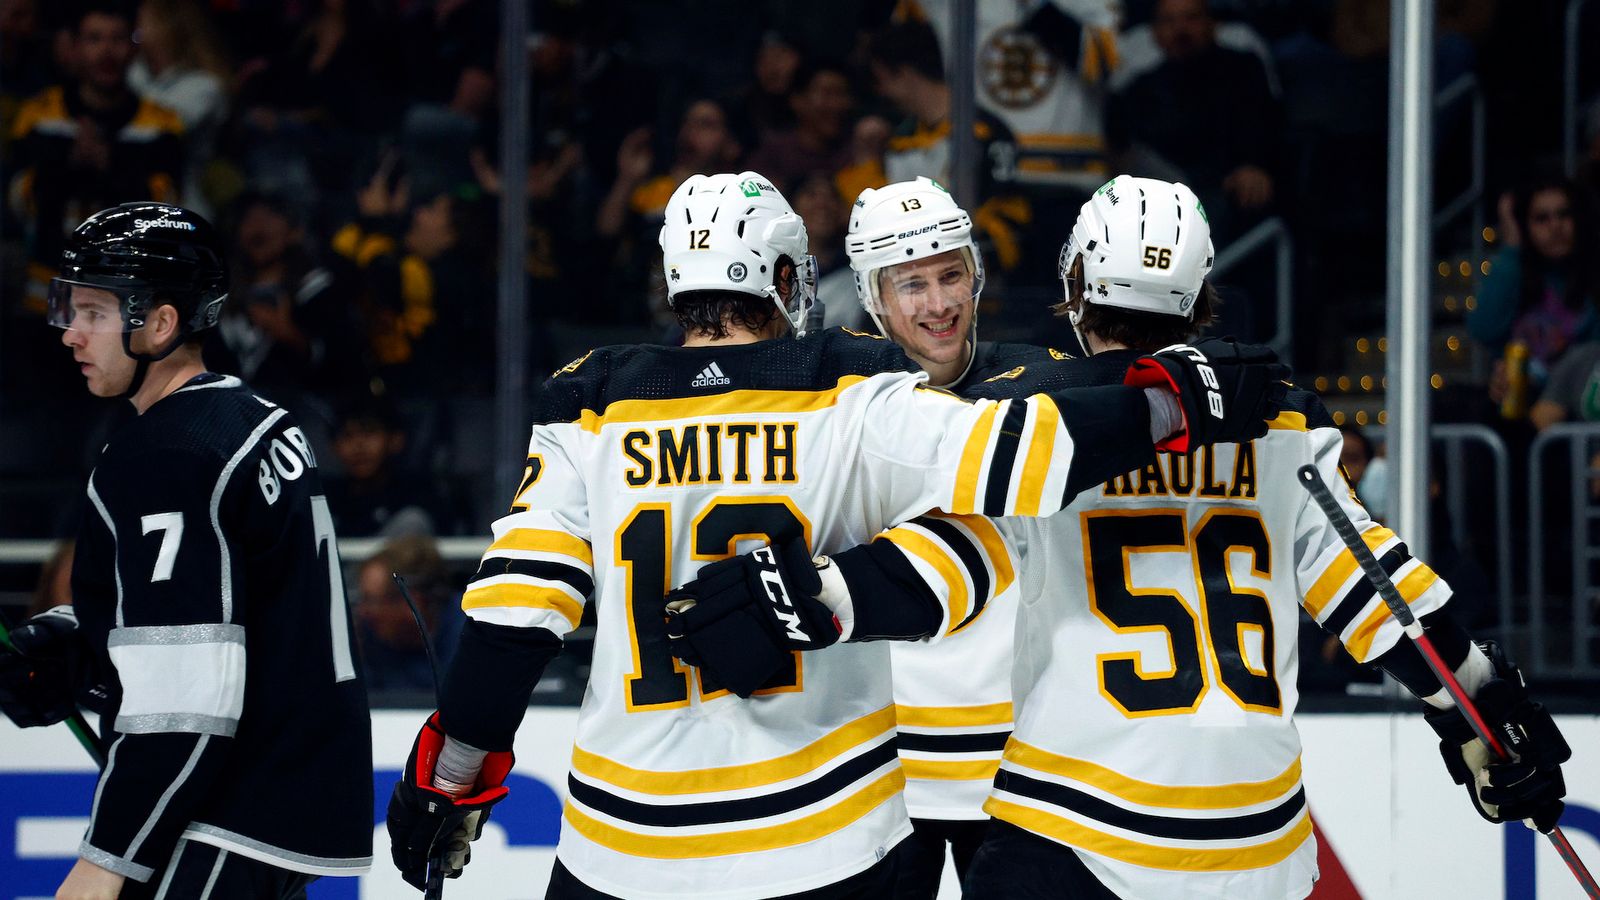 NHL Notebook Sizing up the Bruins’ 7th Player Award candidates